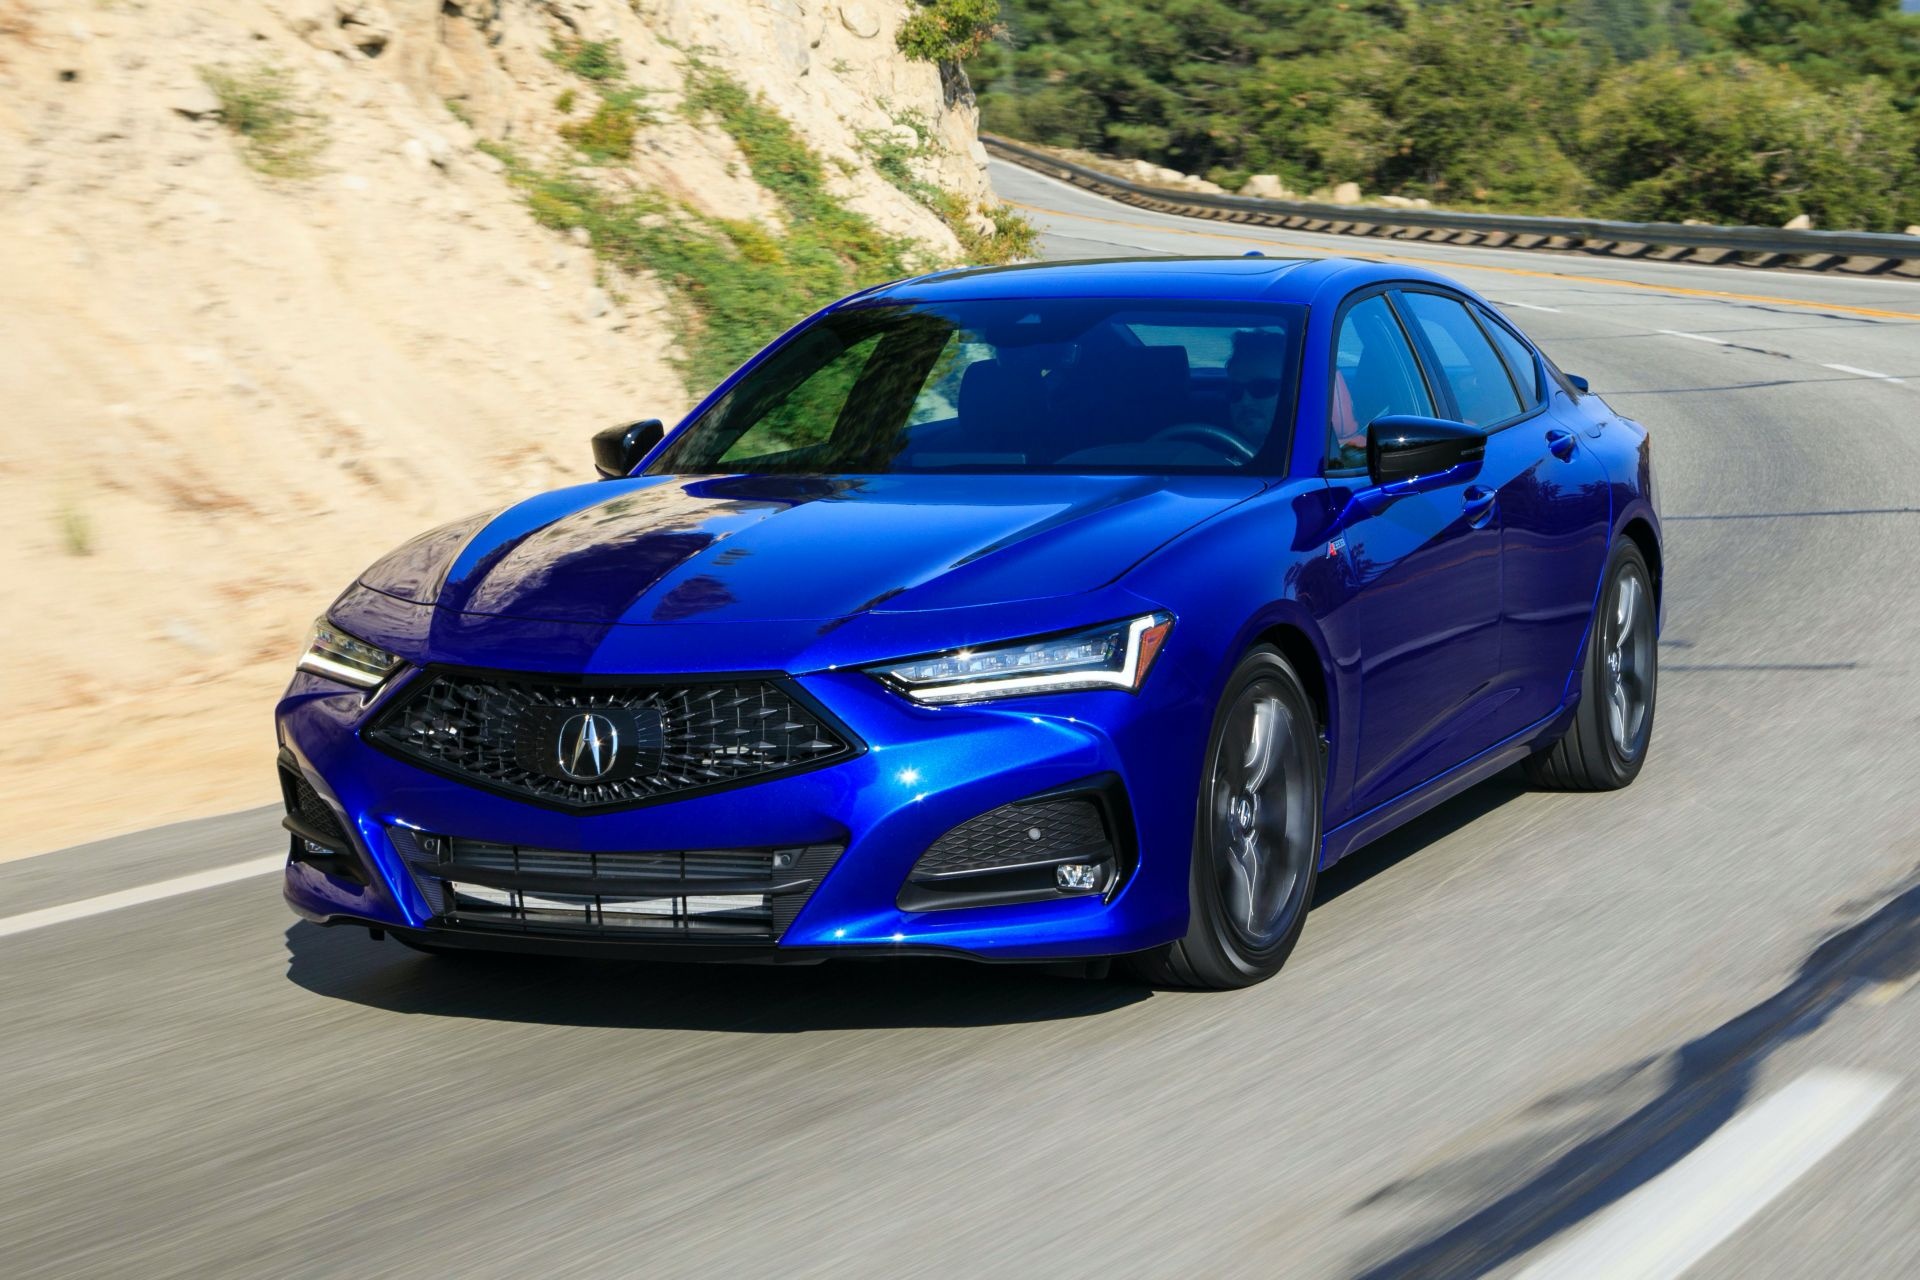 2021 Acura TLX A-Spec, Free download wallpapers, Luxury car imagery, Exclusive design, 1920x1280 HD Desktop